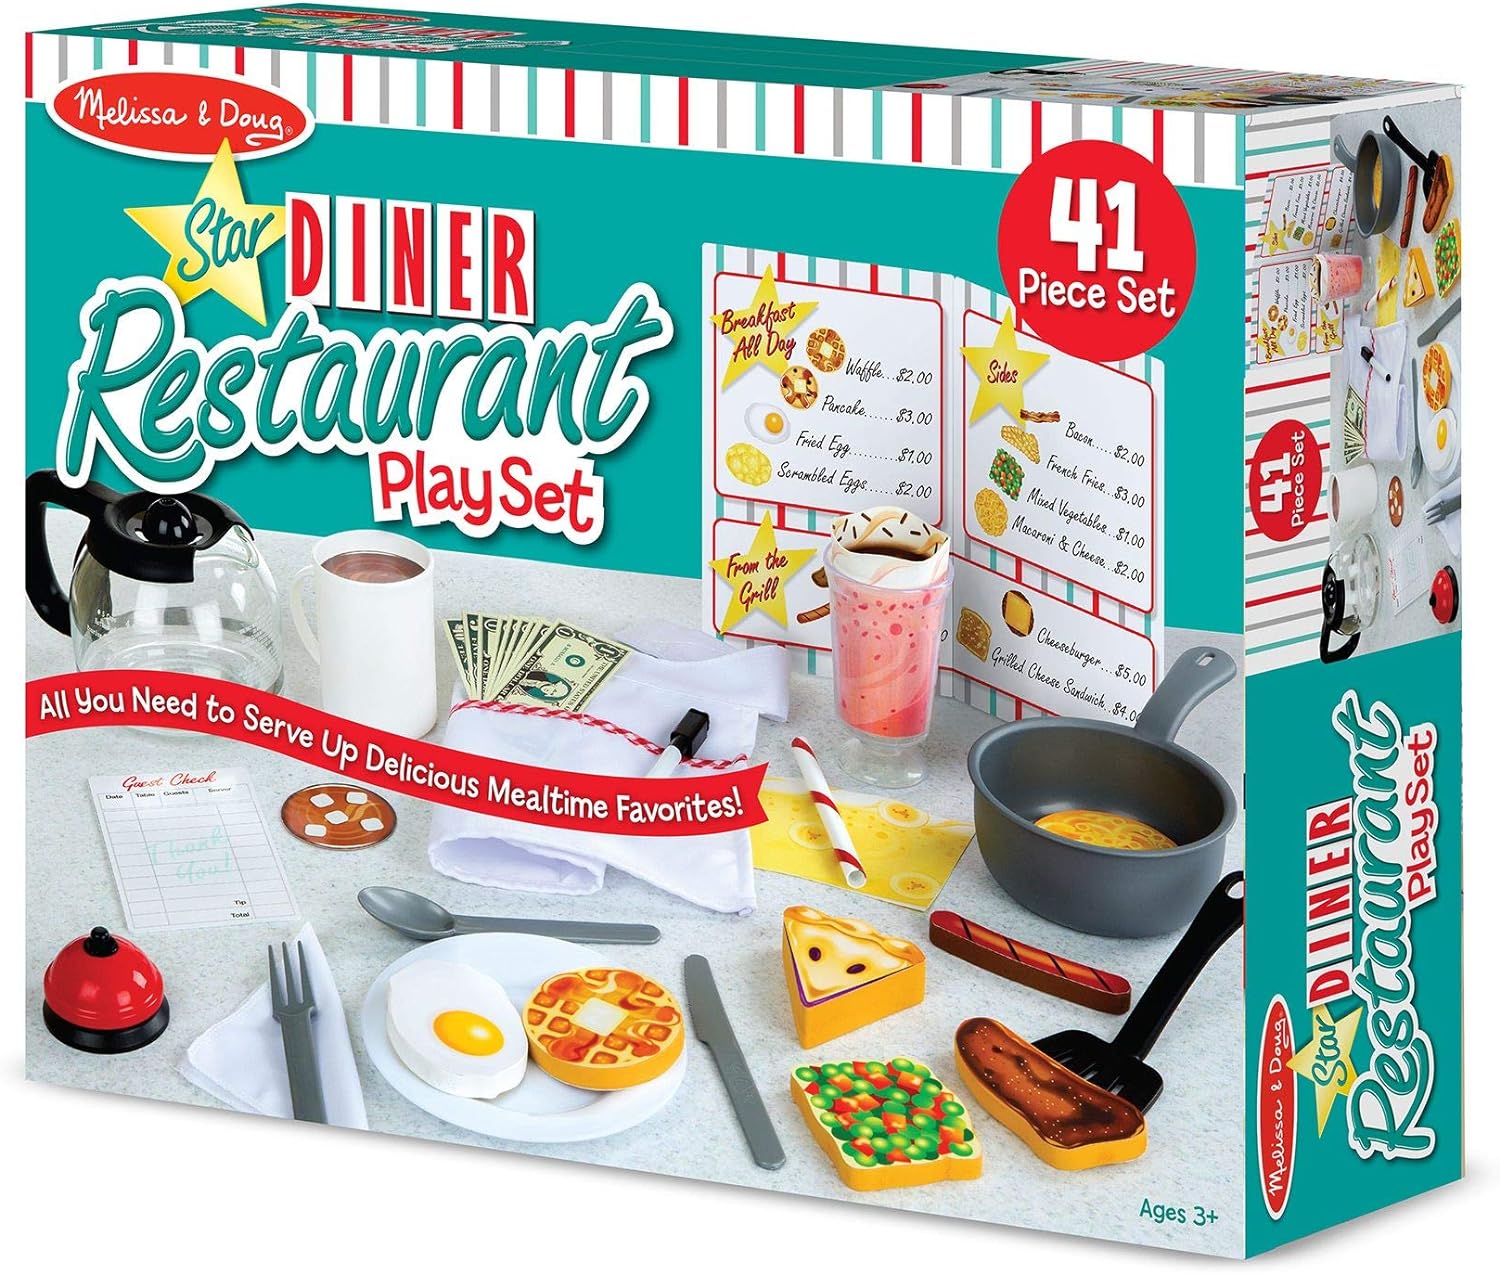 Melissa & Doug Star Diner Restaurant Play Set (41 pcs) - Pretend Play Food, Restaurant Toy Set With Cookware, Utensils For Kids, Diner Playset for Kids And Toddlers, Ages 3+